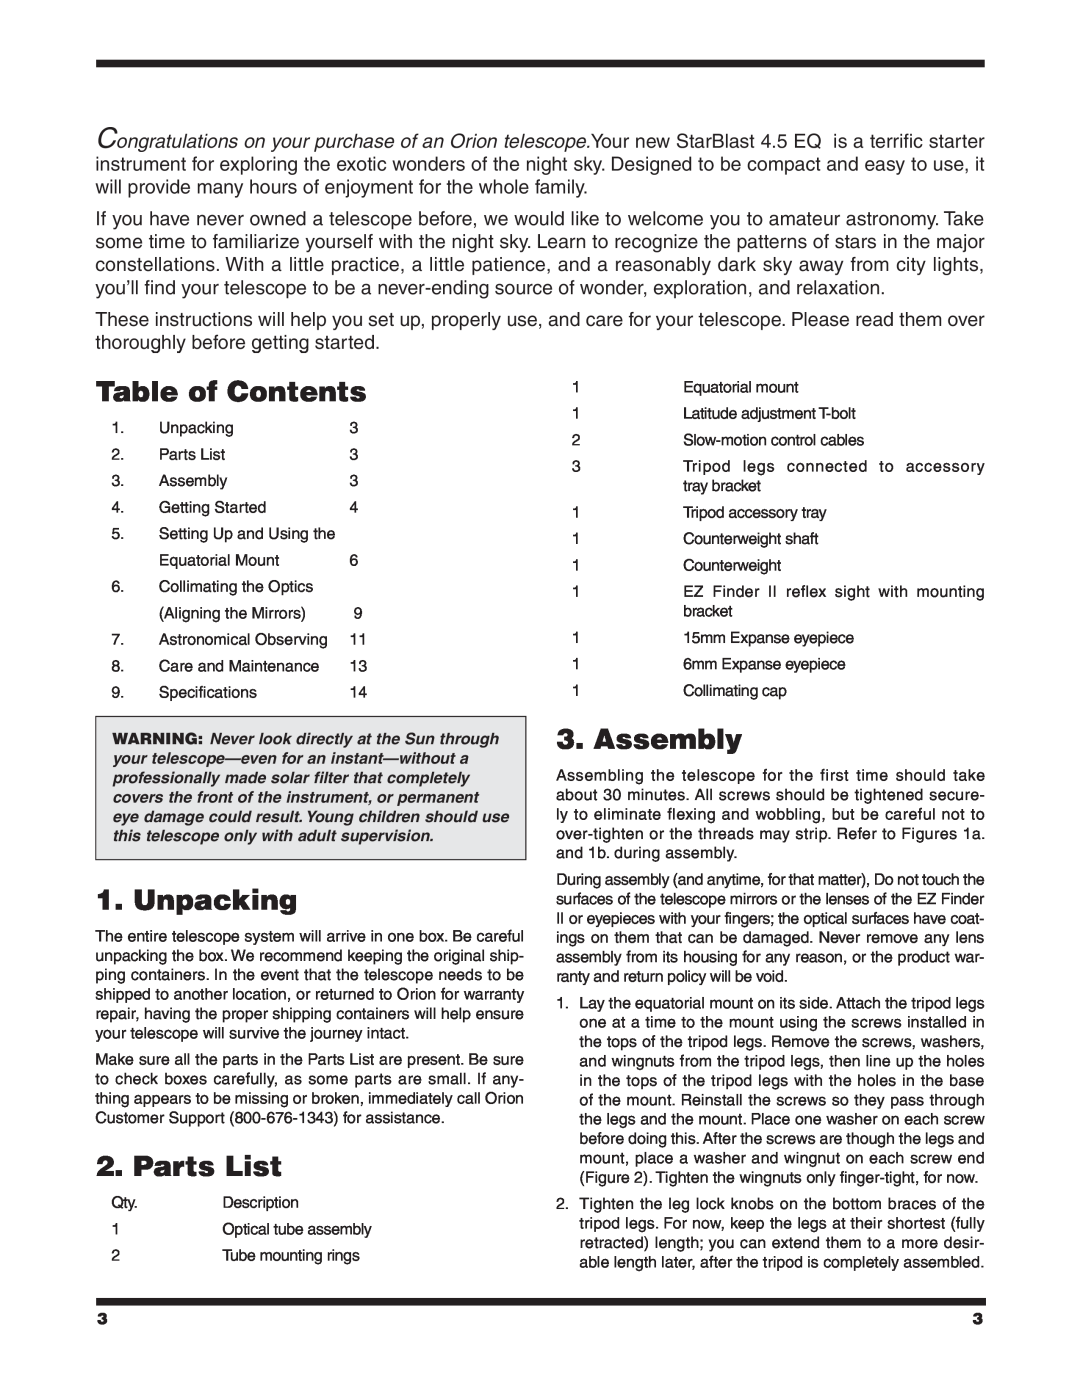 Orion 4.5 EQ instruction manual Table of Contents, Unpacking, Parts List, Assembly 